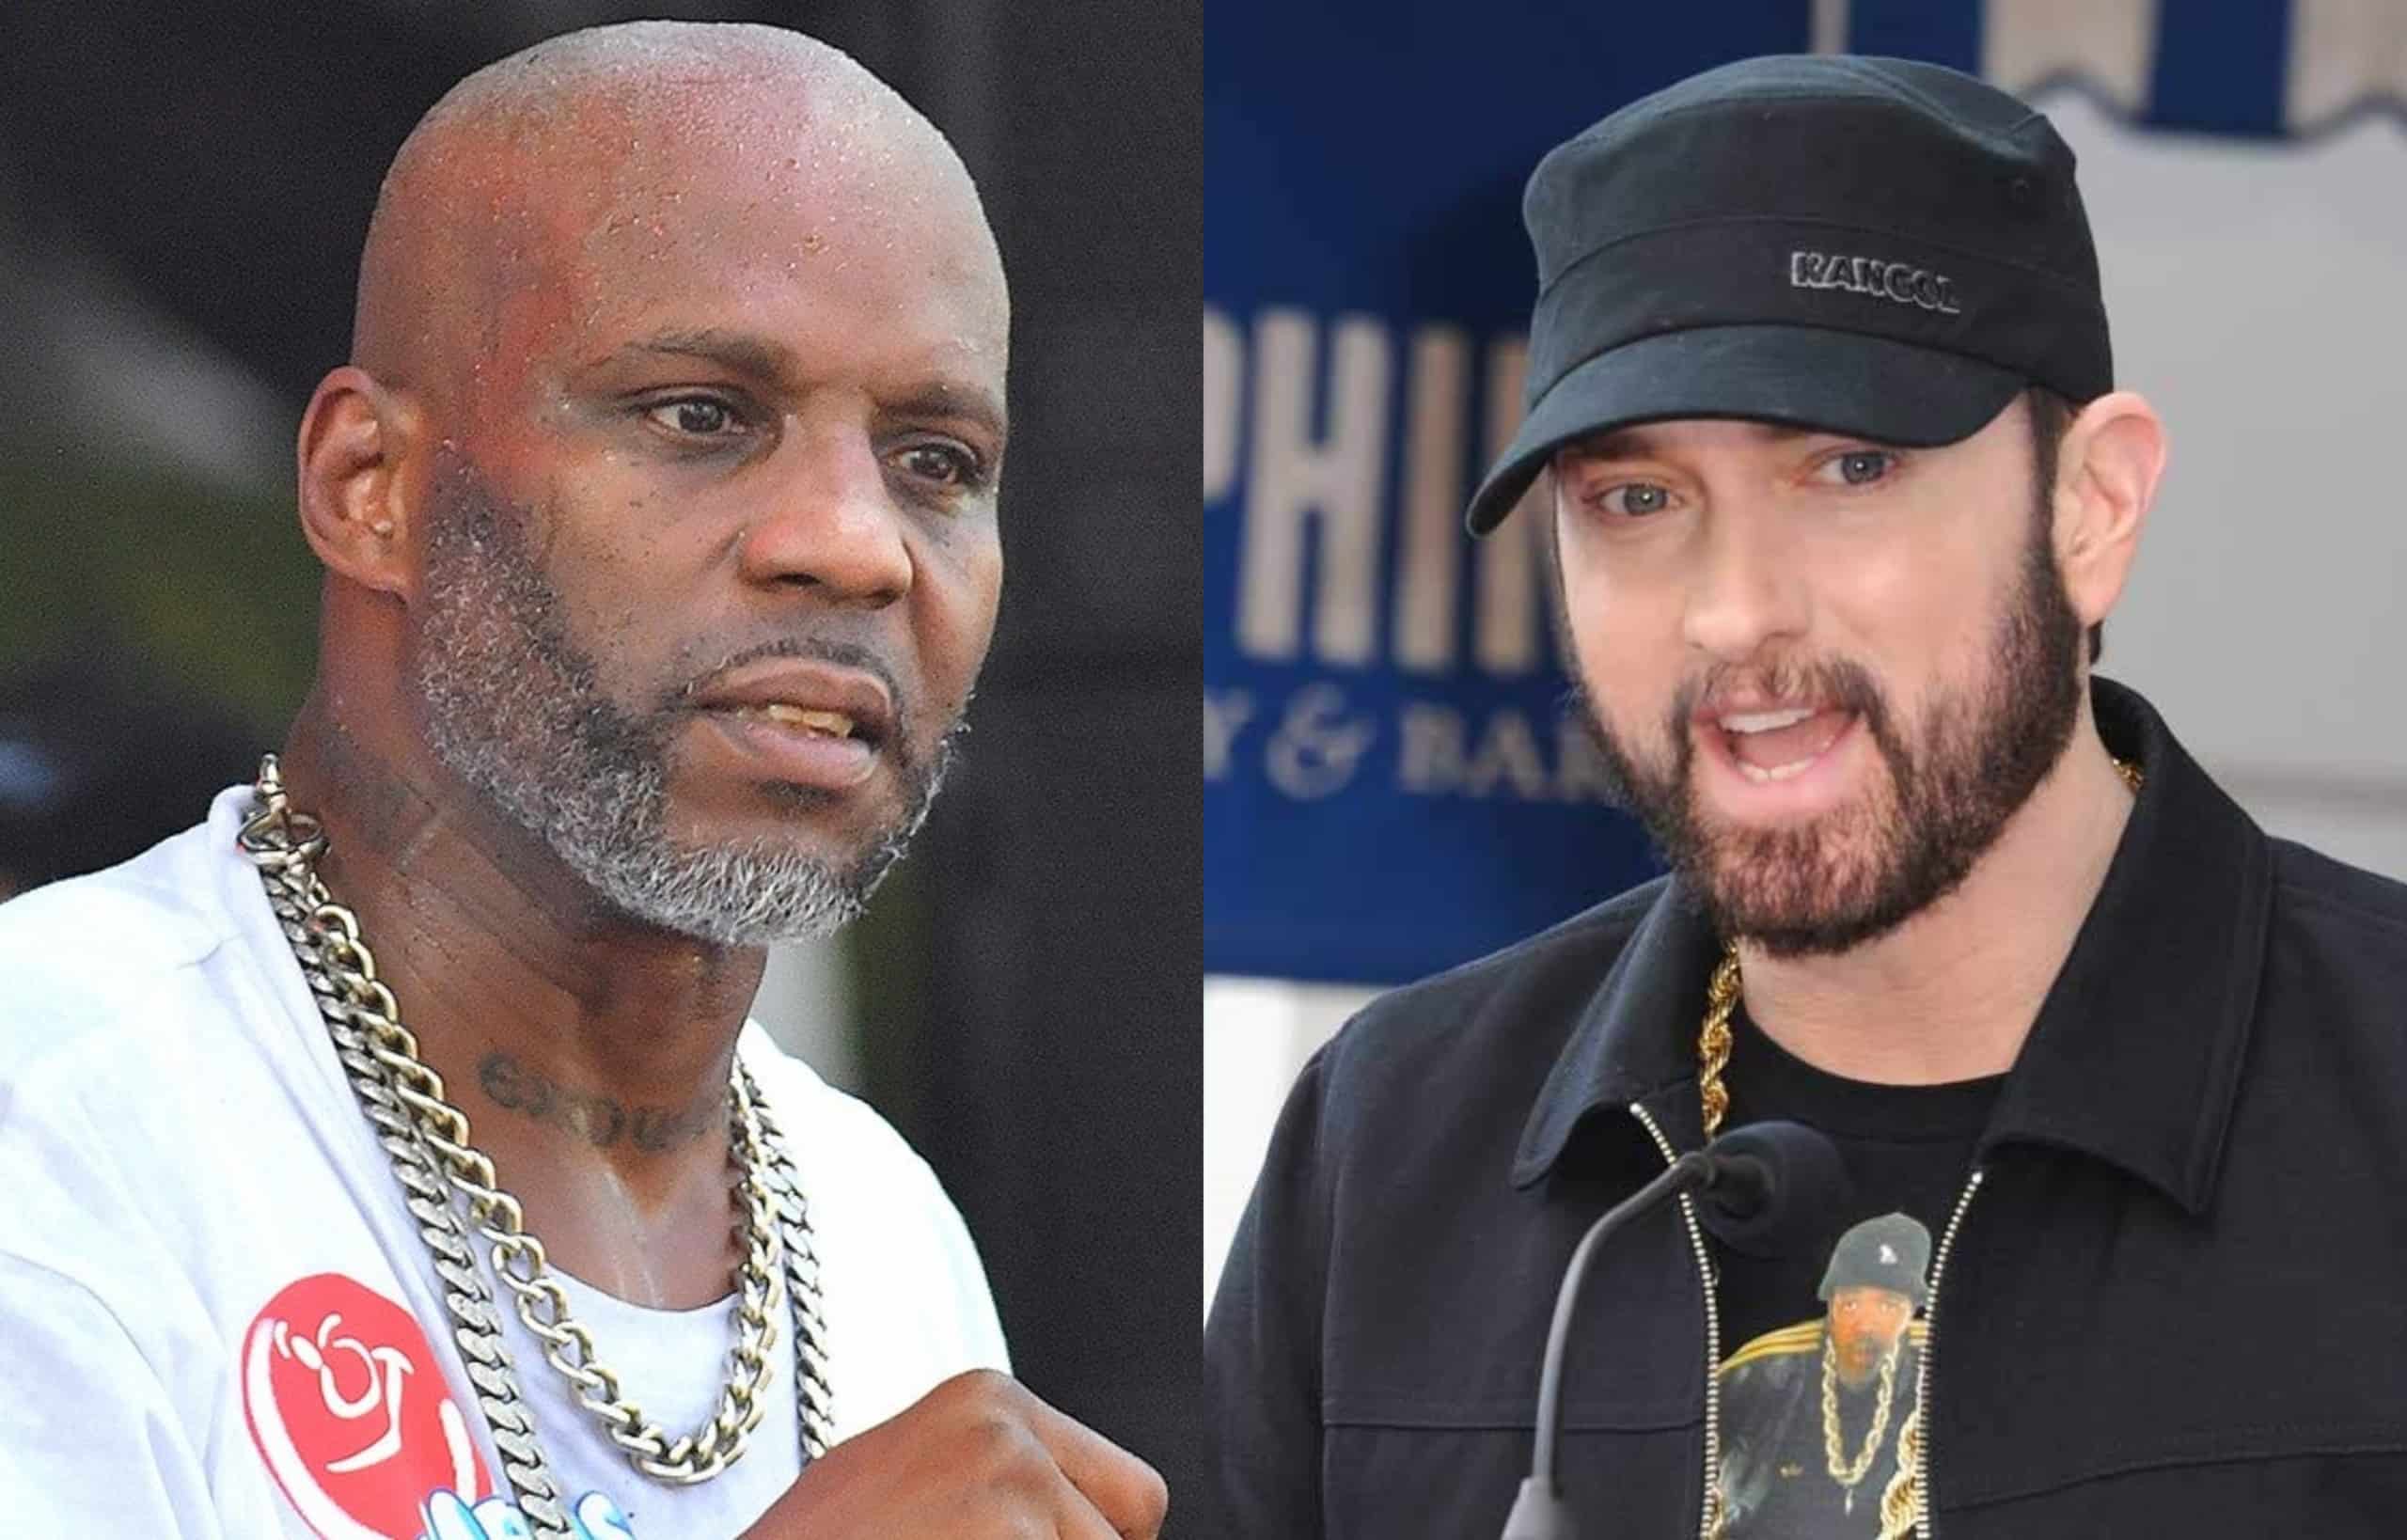 BREAKING N.O.R.E Says That Eminem is Ready For A Verzuz Battle with DMX